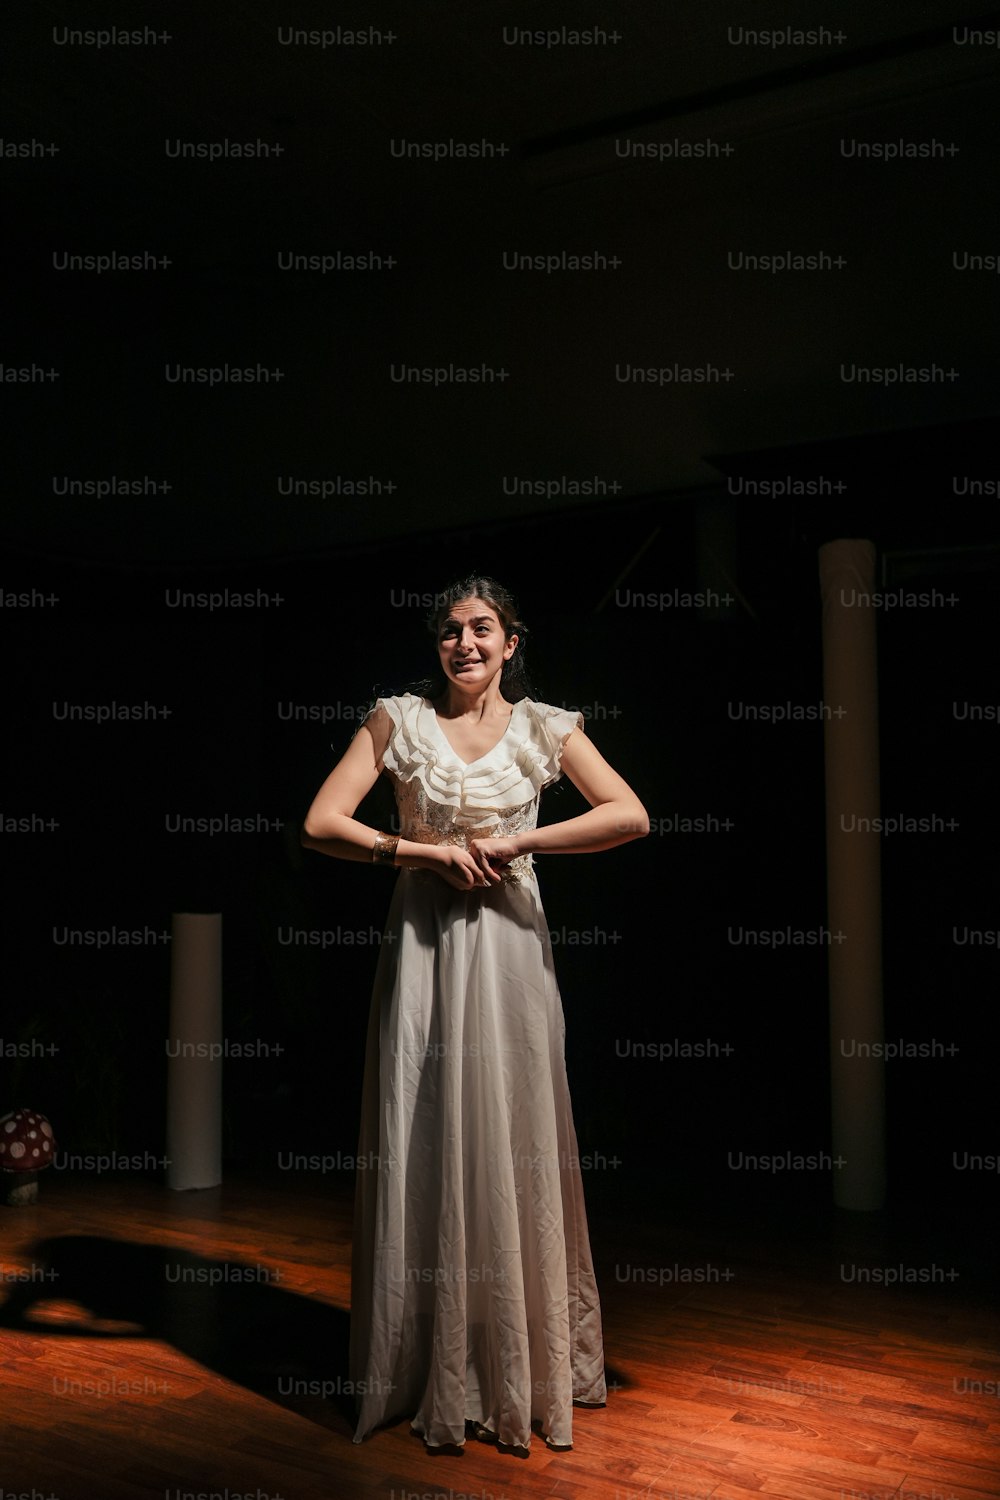 a woman in a white dress standing on a wooden floor